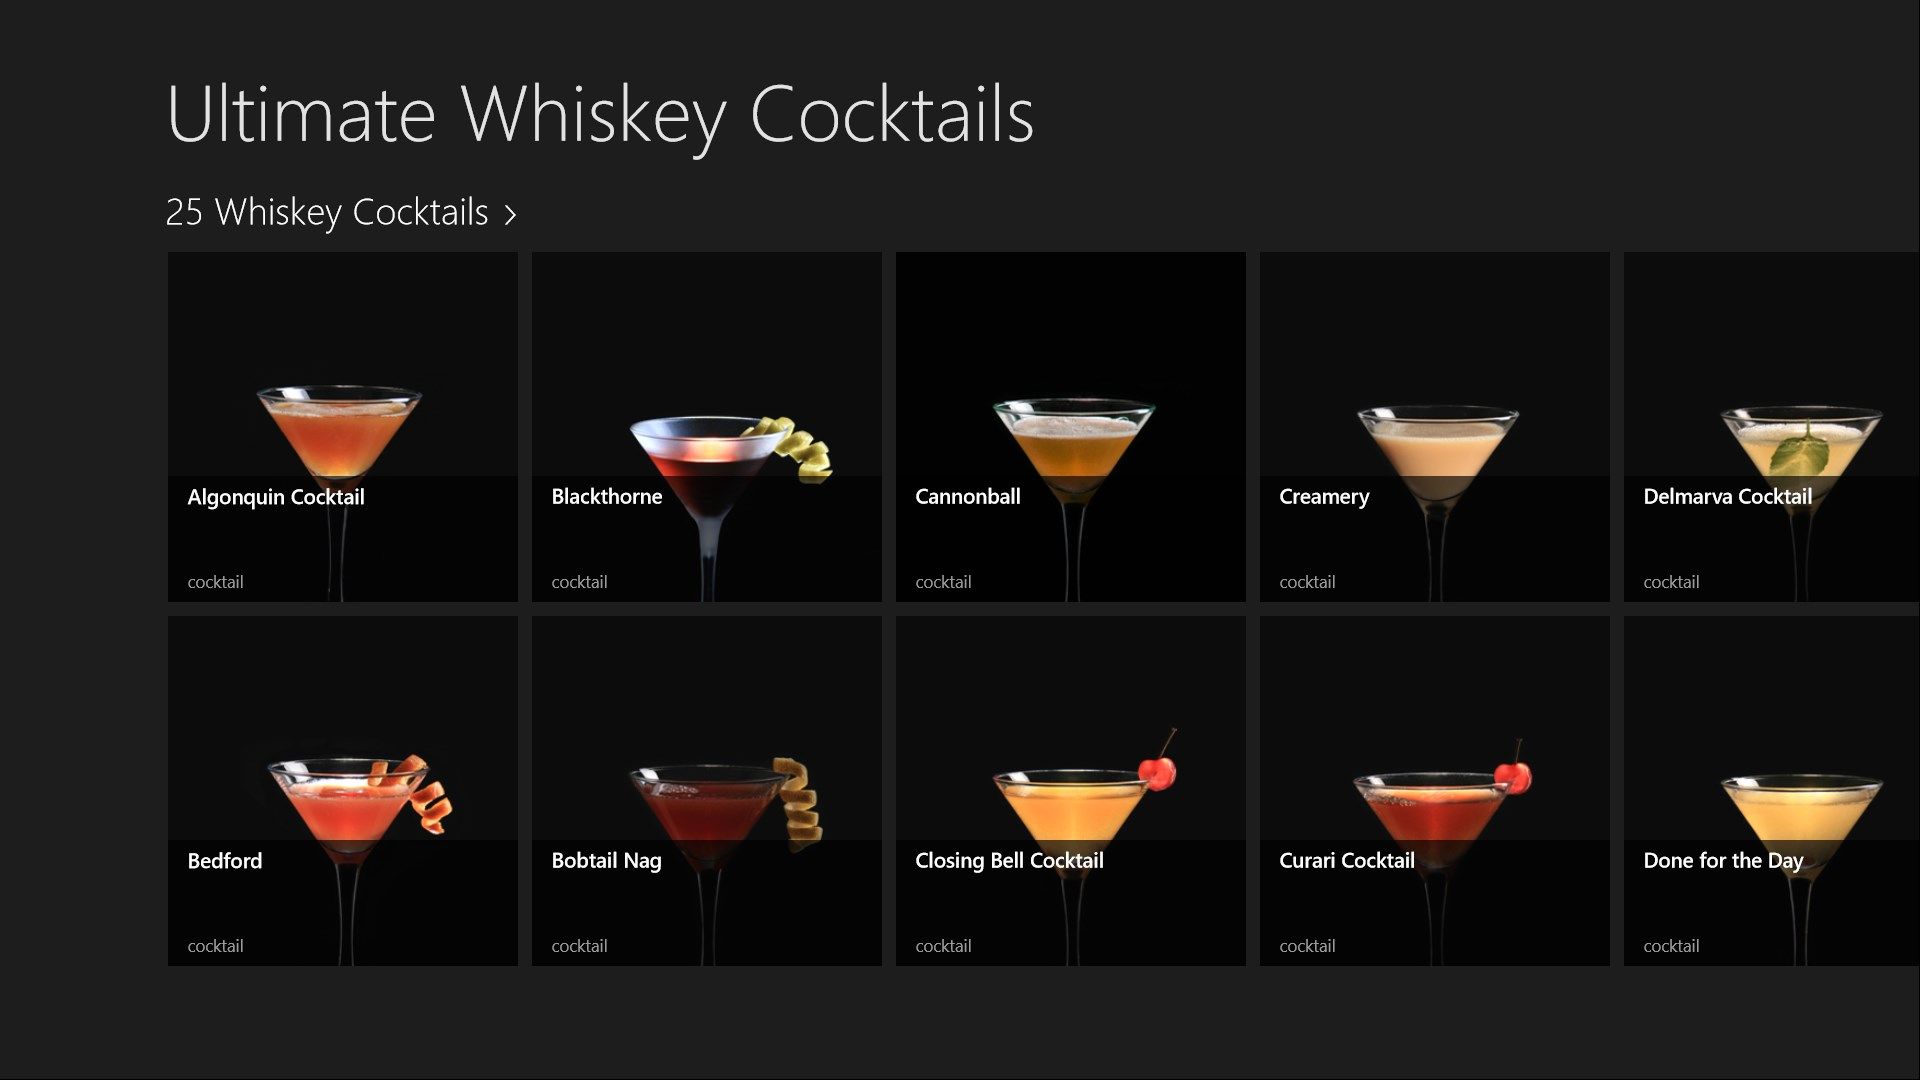 Showing thumbnails of all the cocktails